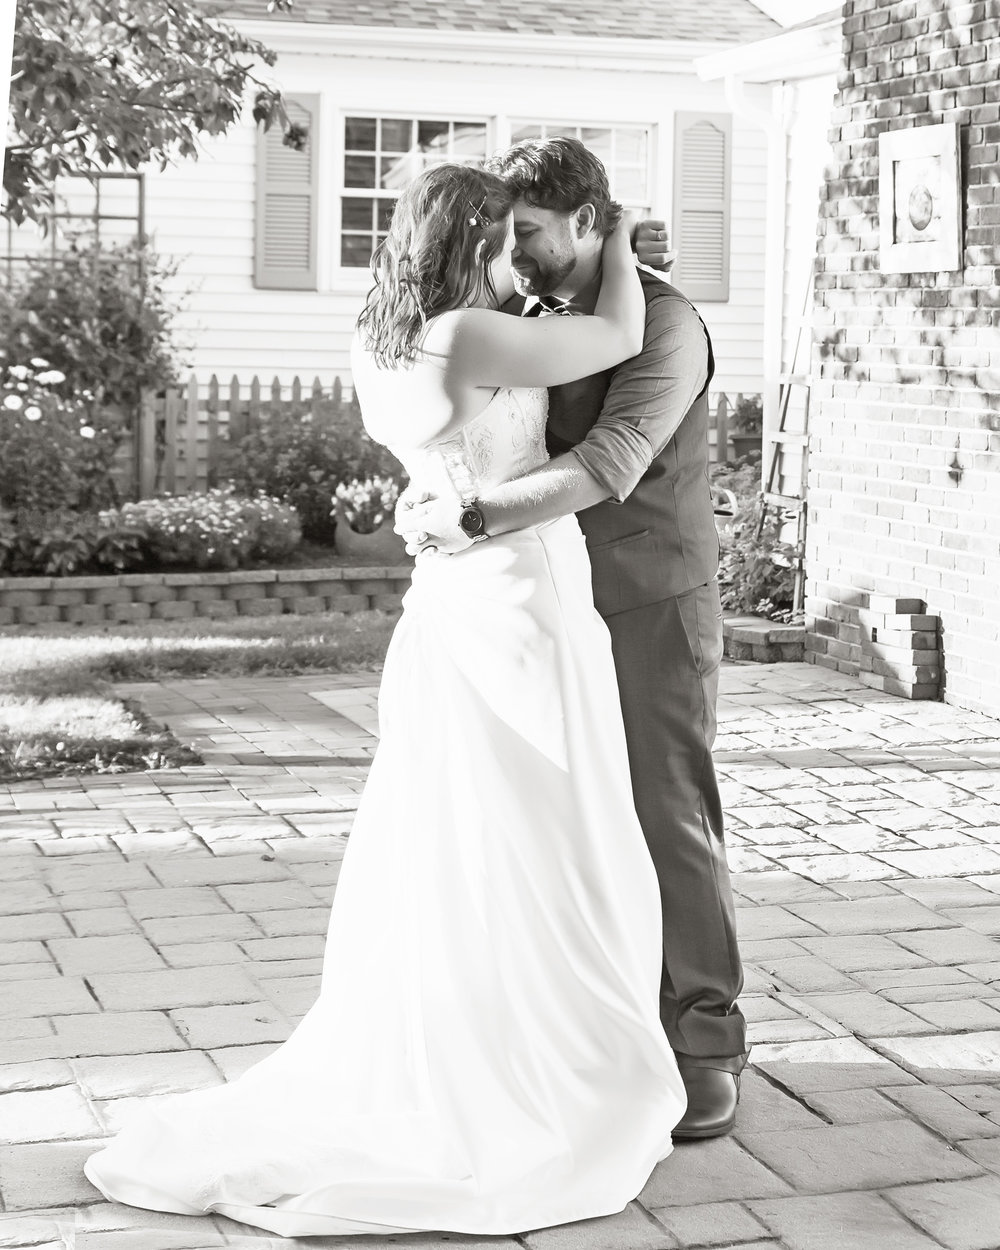 SSP summer wedding|reception| bride and groom| black and white